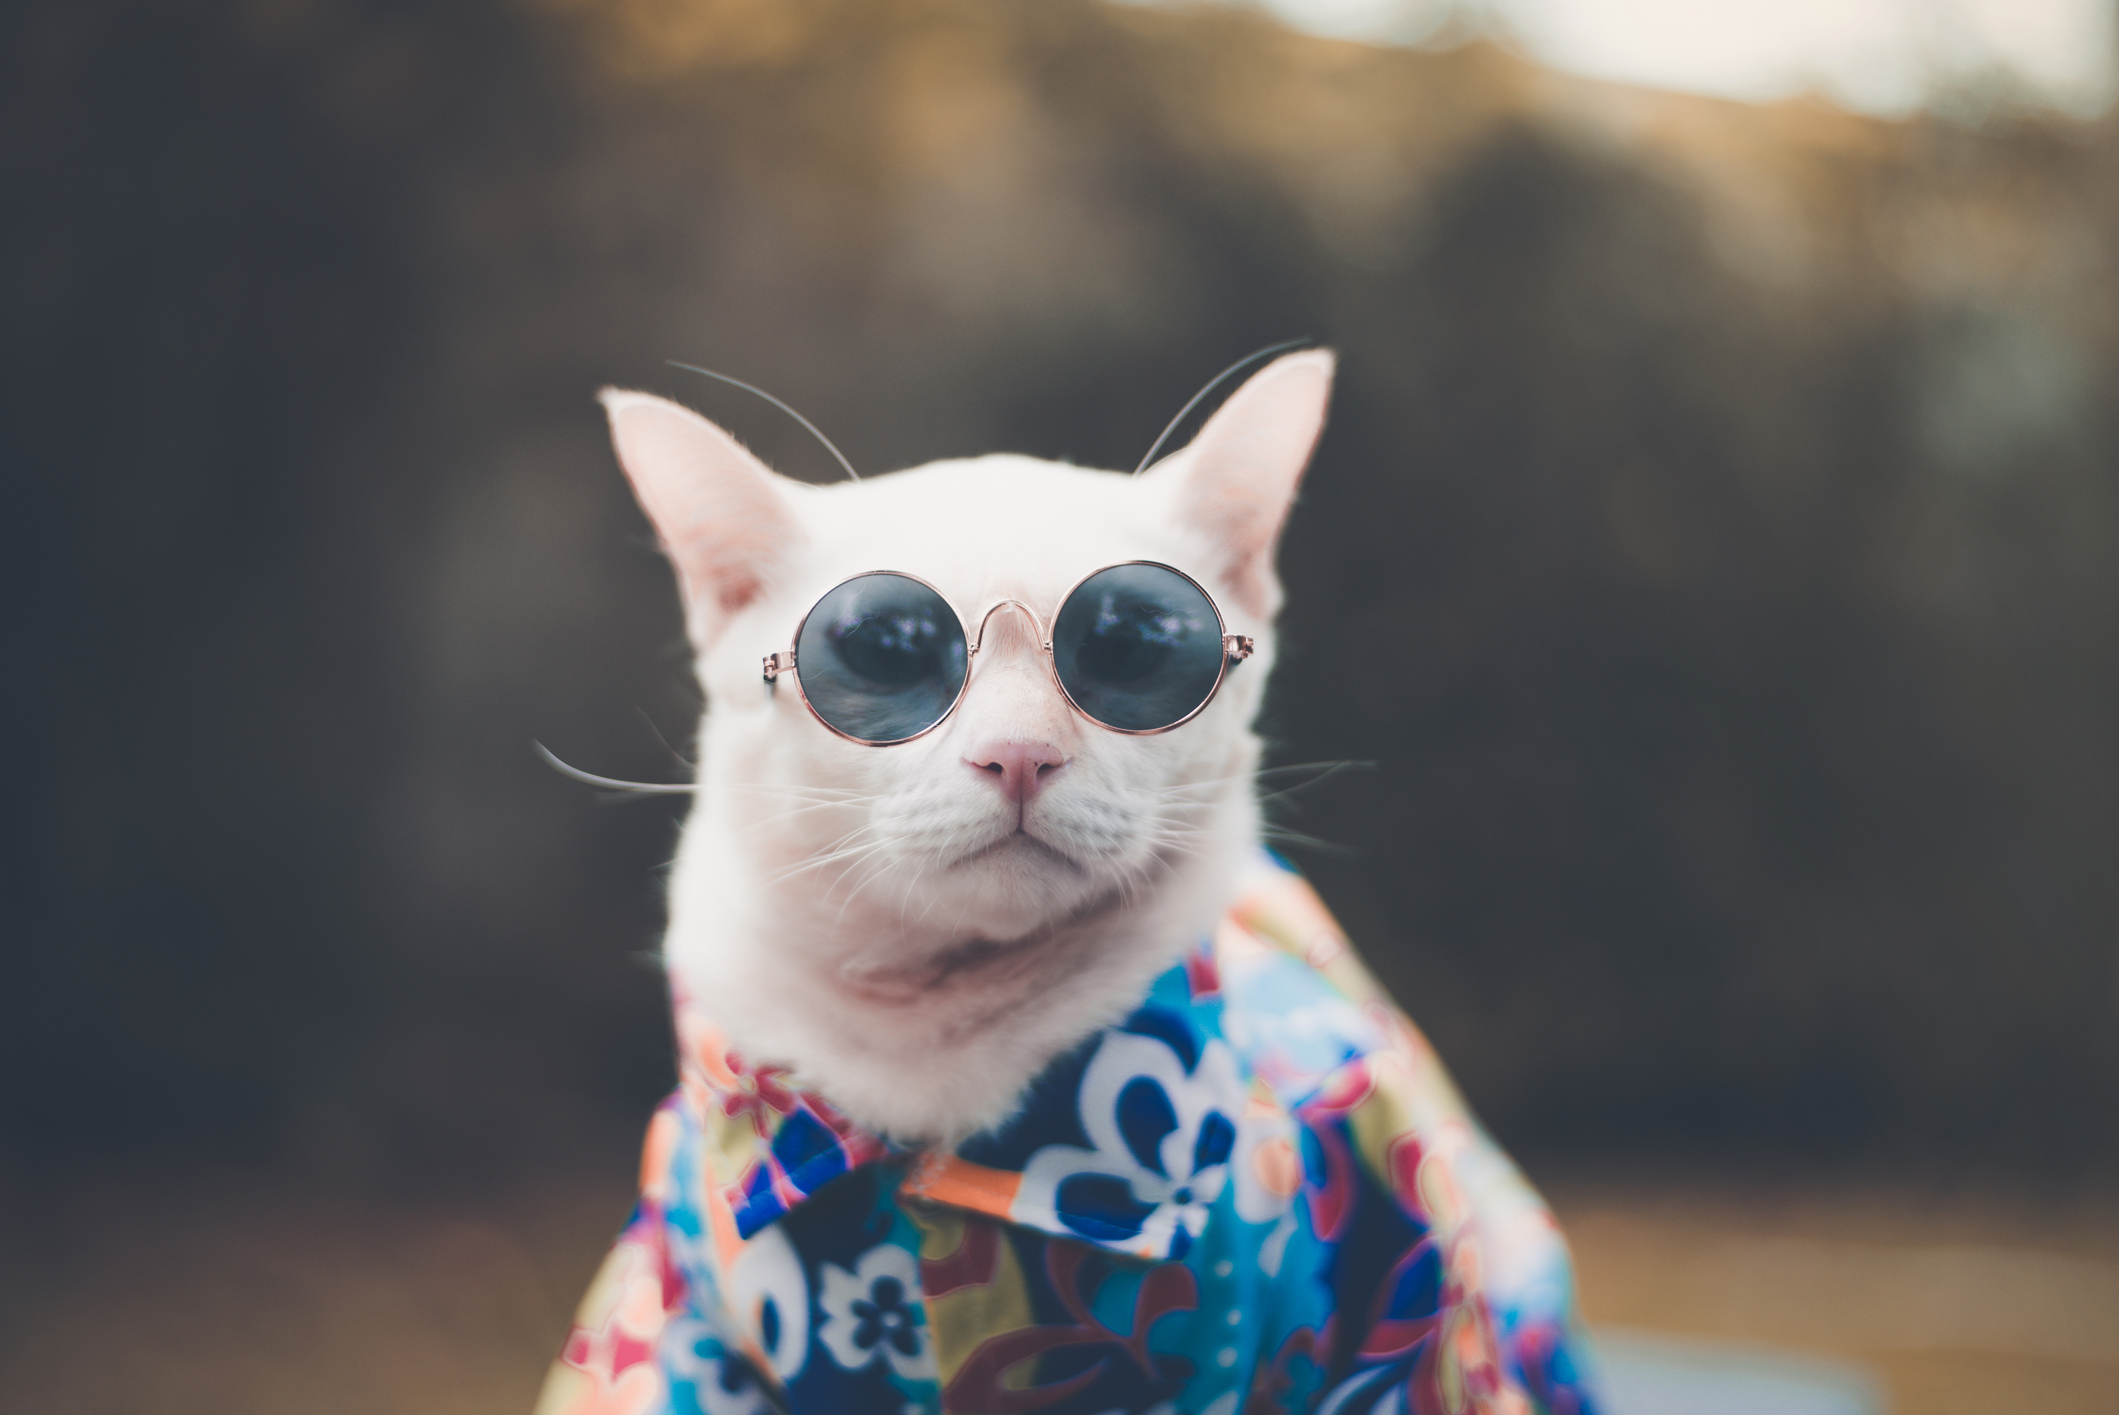 Clothing On Cats - Is it Ethical? - CatGazette